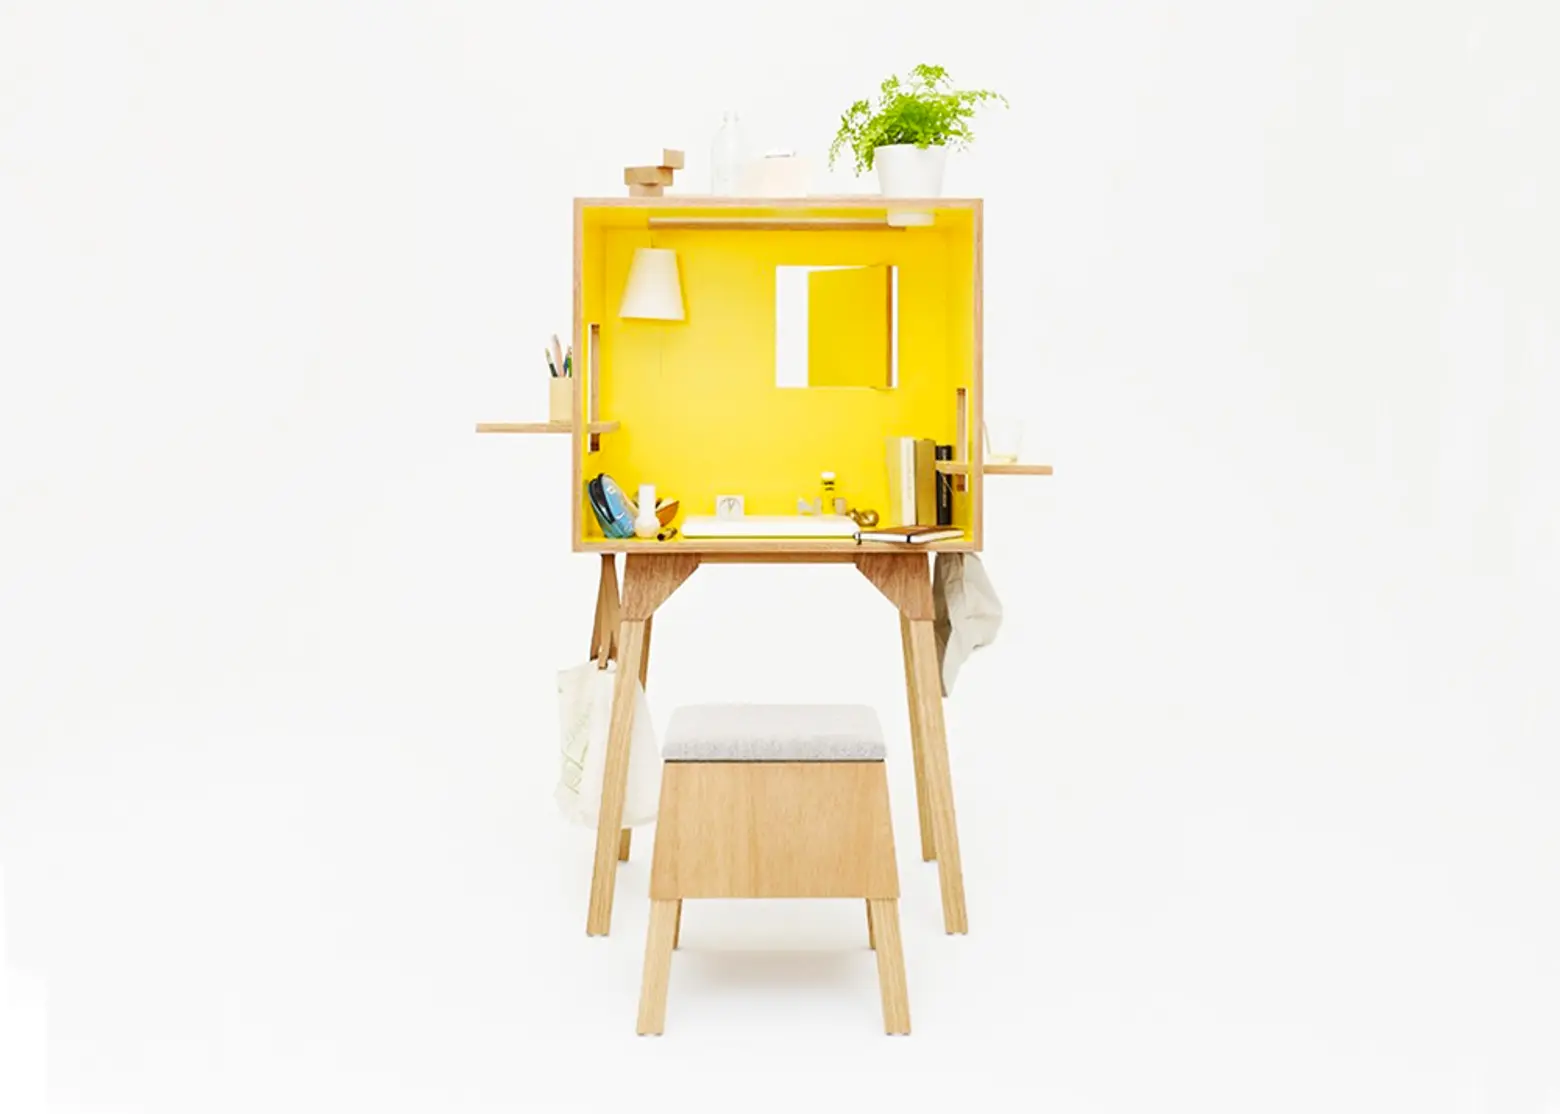 Torafu’s Koloro is a Cute and Functional Office Wrapped Up in a Compact Desk